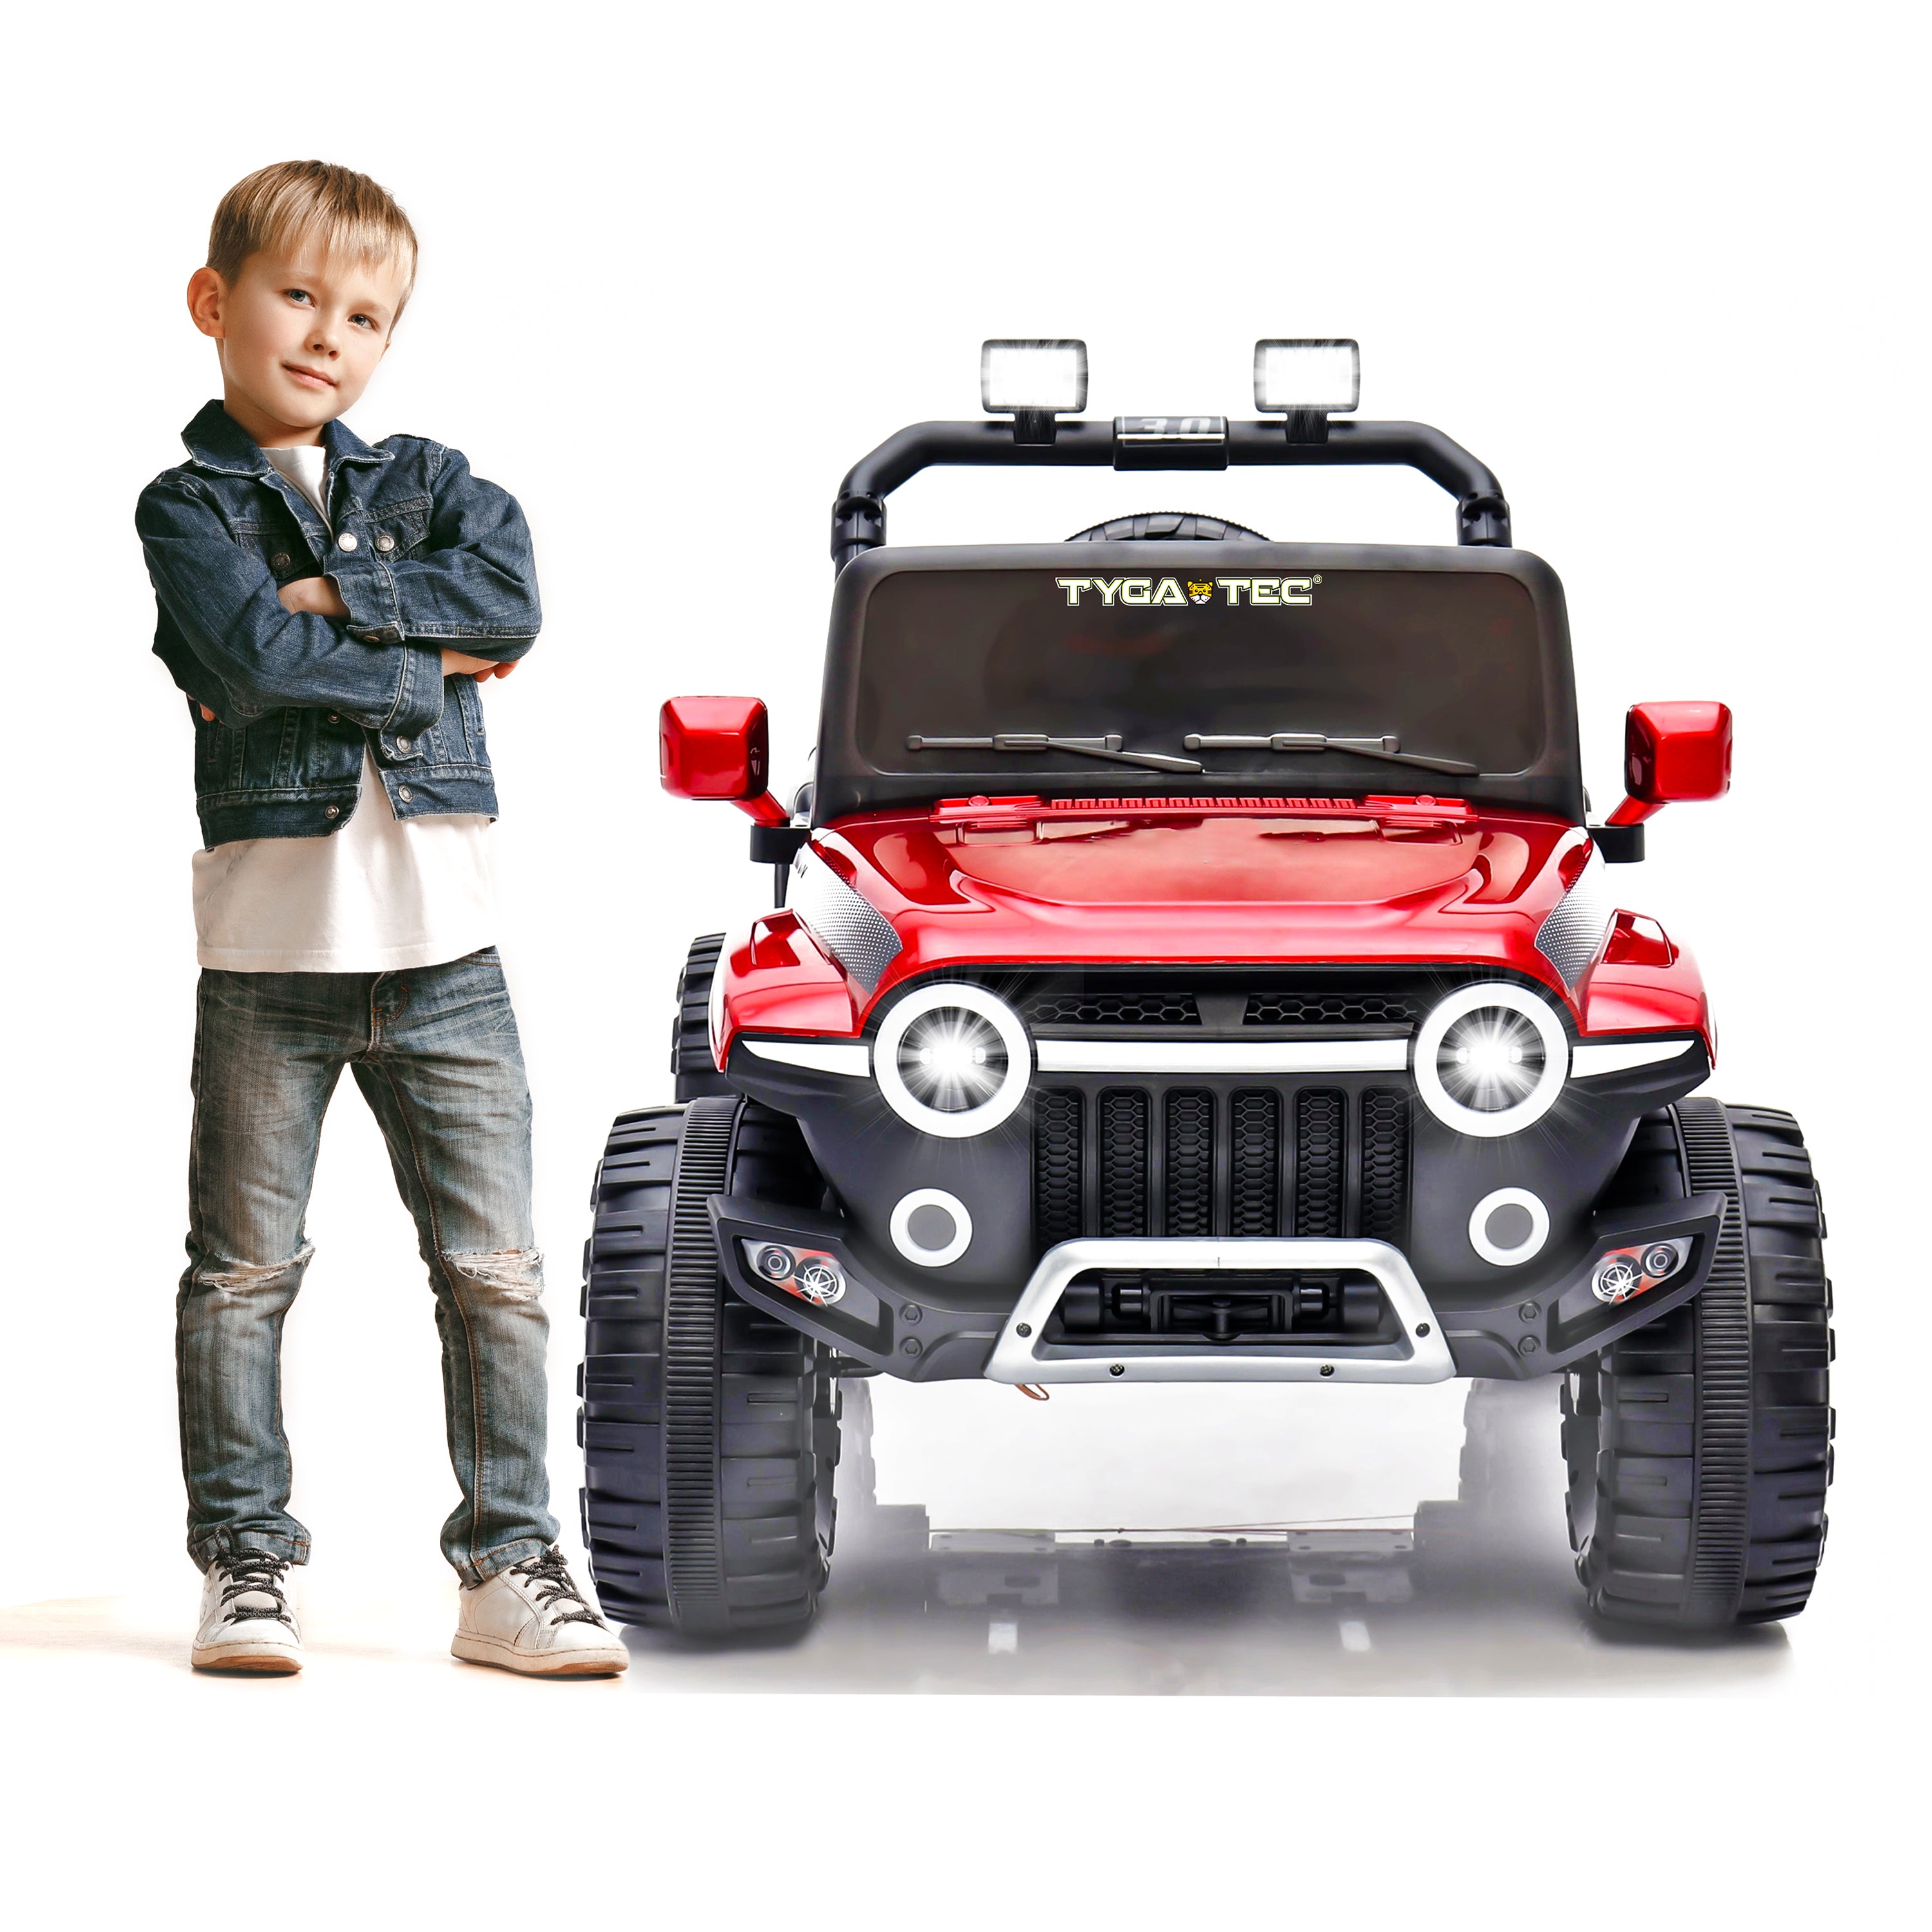 Tygatec Ride-on Kids Car Ground Force SCOUT (RED COLOUR)